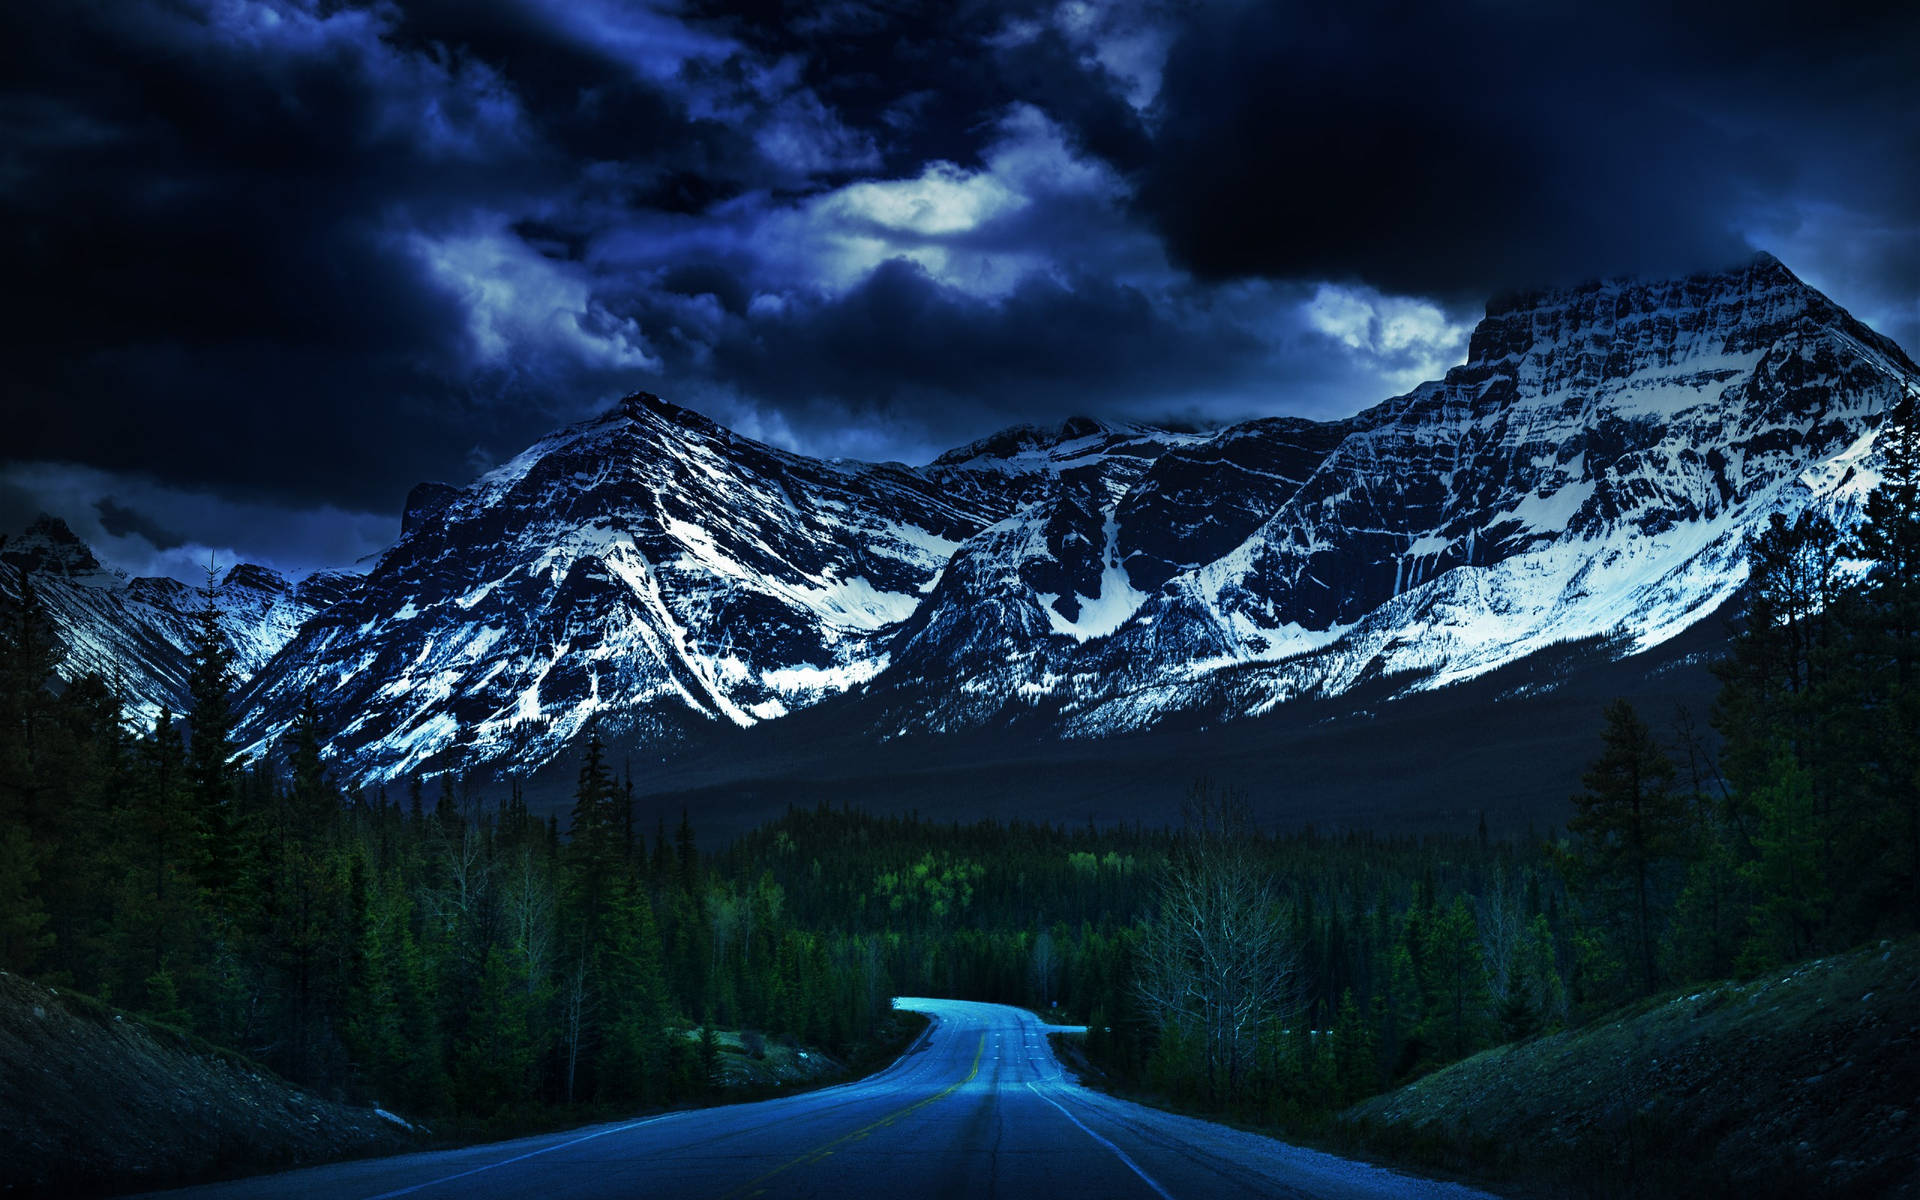 Dark Blue Clouds Over Snowy Mountains Wallpaper